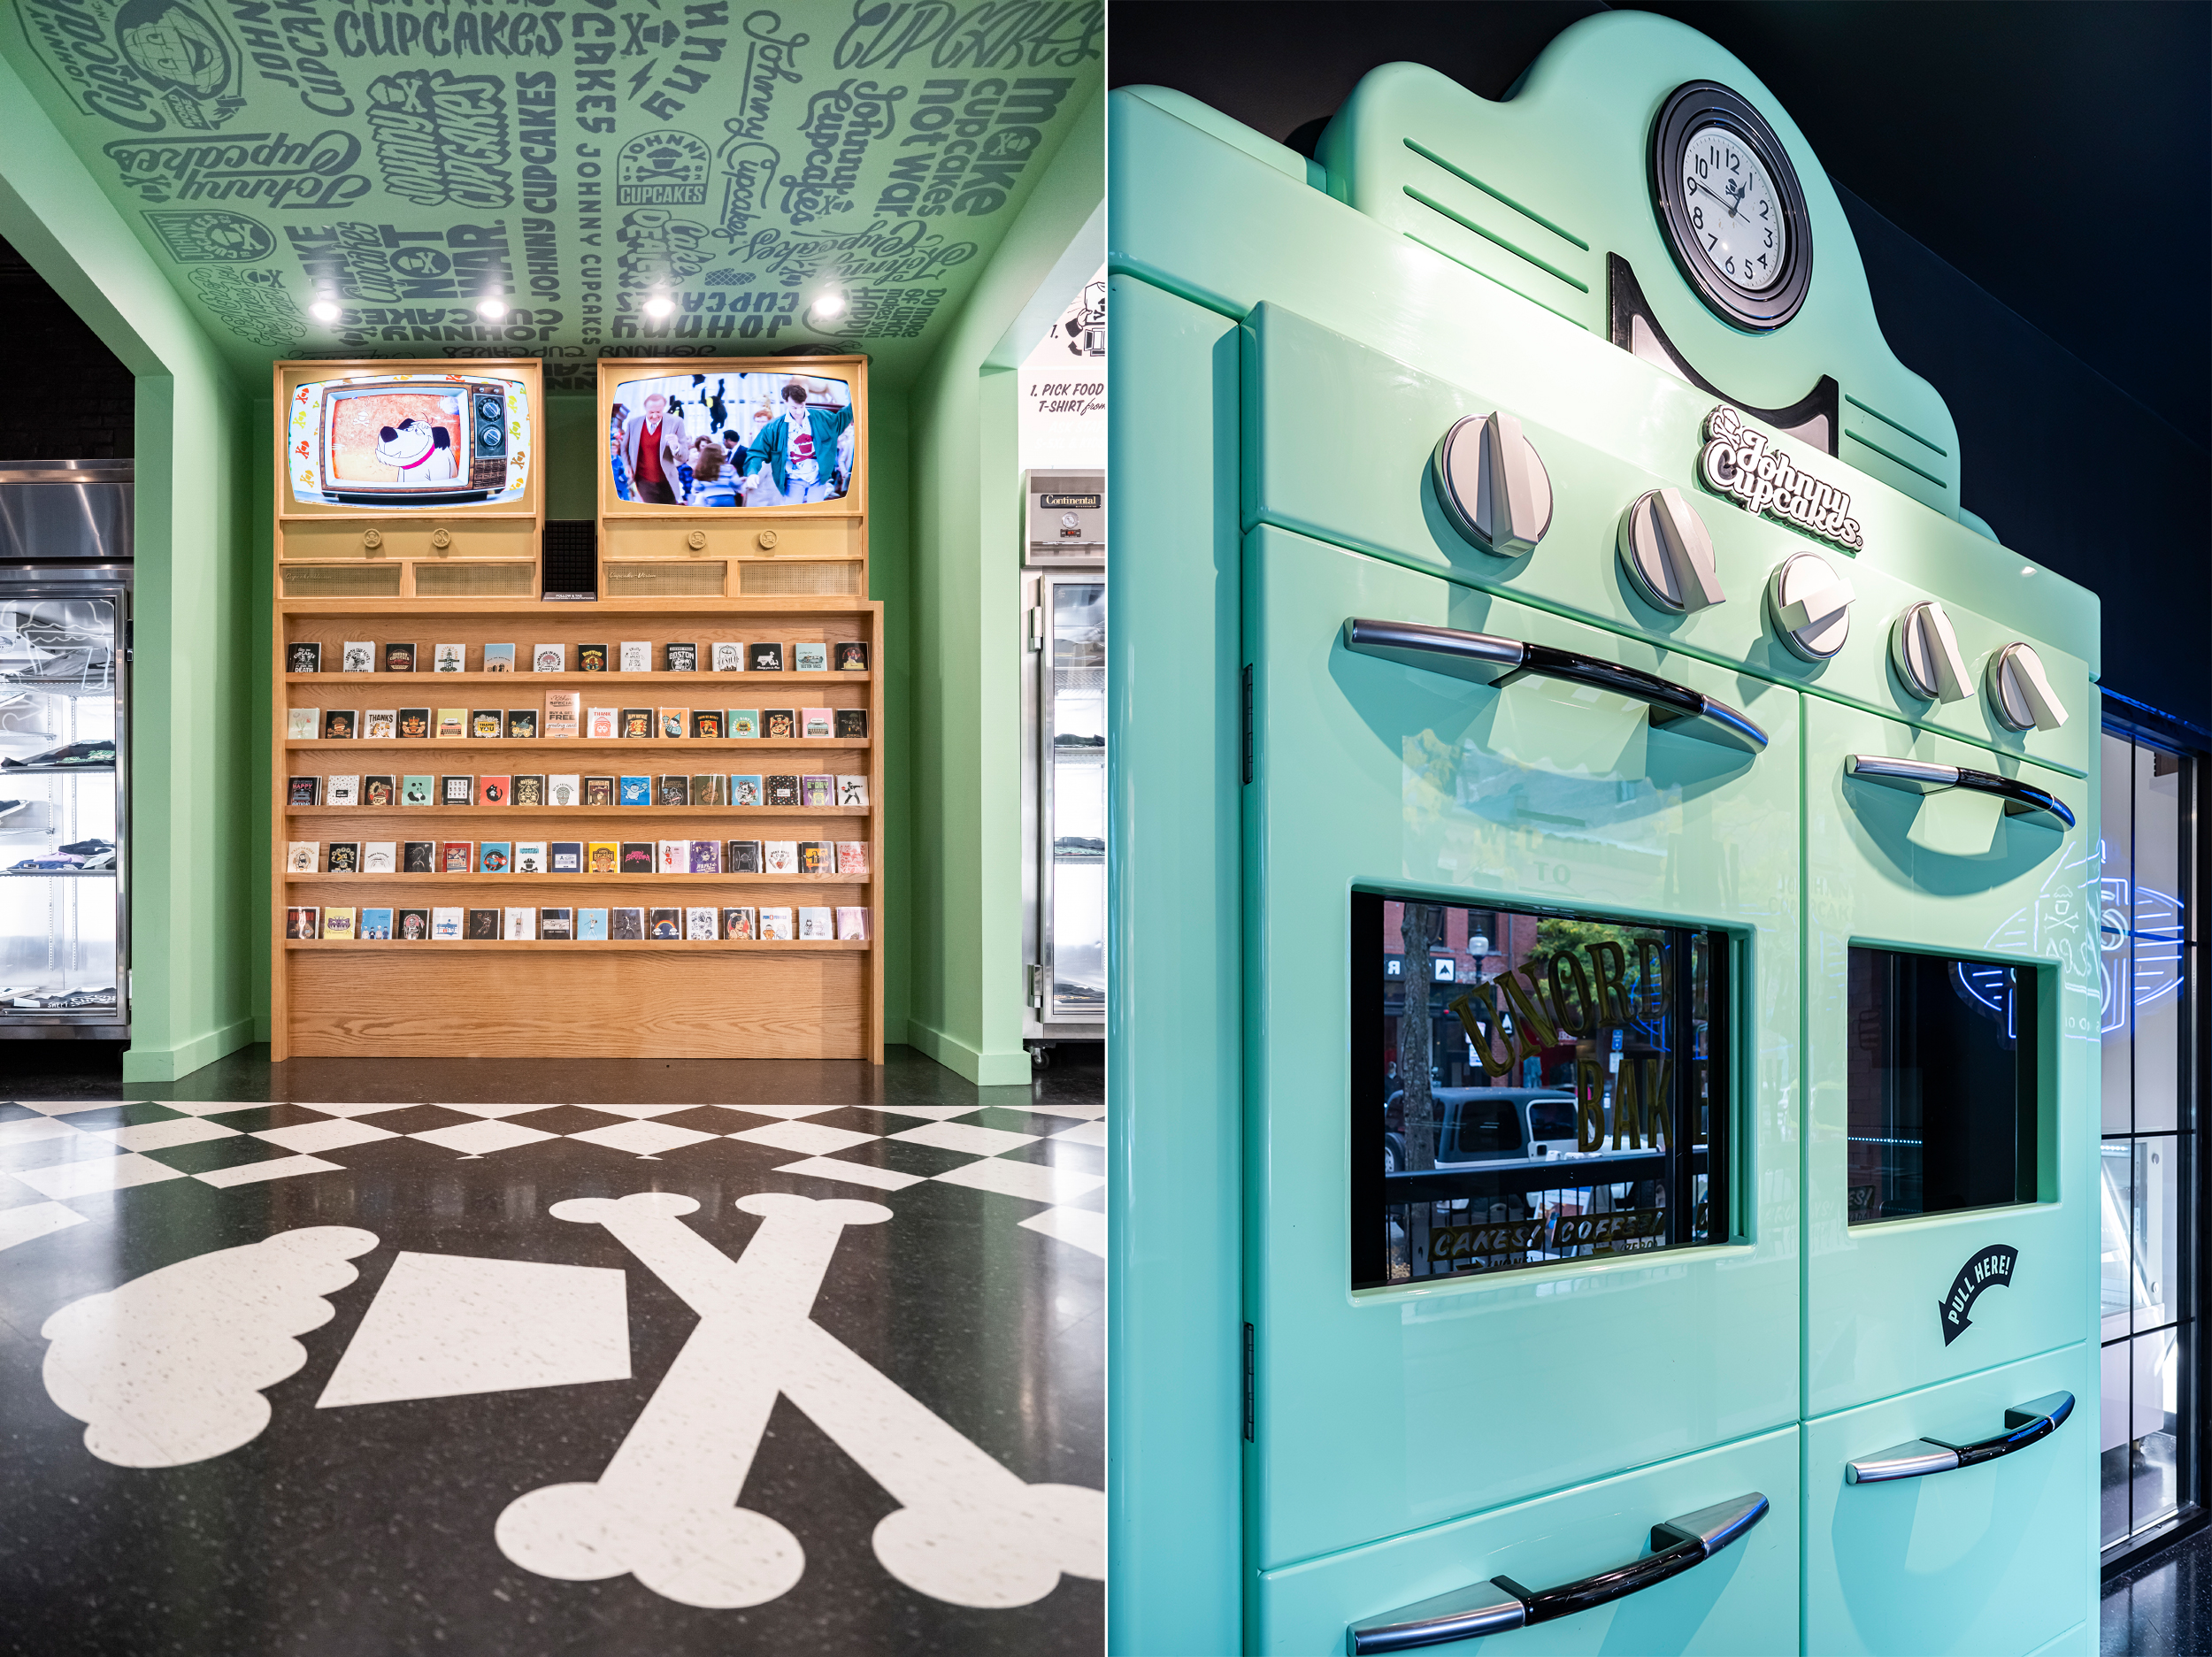 THIS PAGE Filled with sights, sounds and smells, Johnny Cupcakes’ latest store combines retro elements and immersive design.